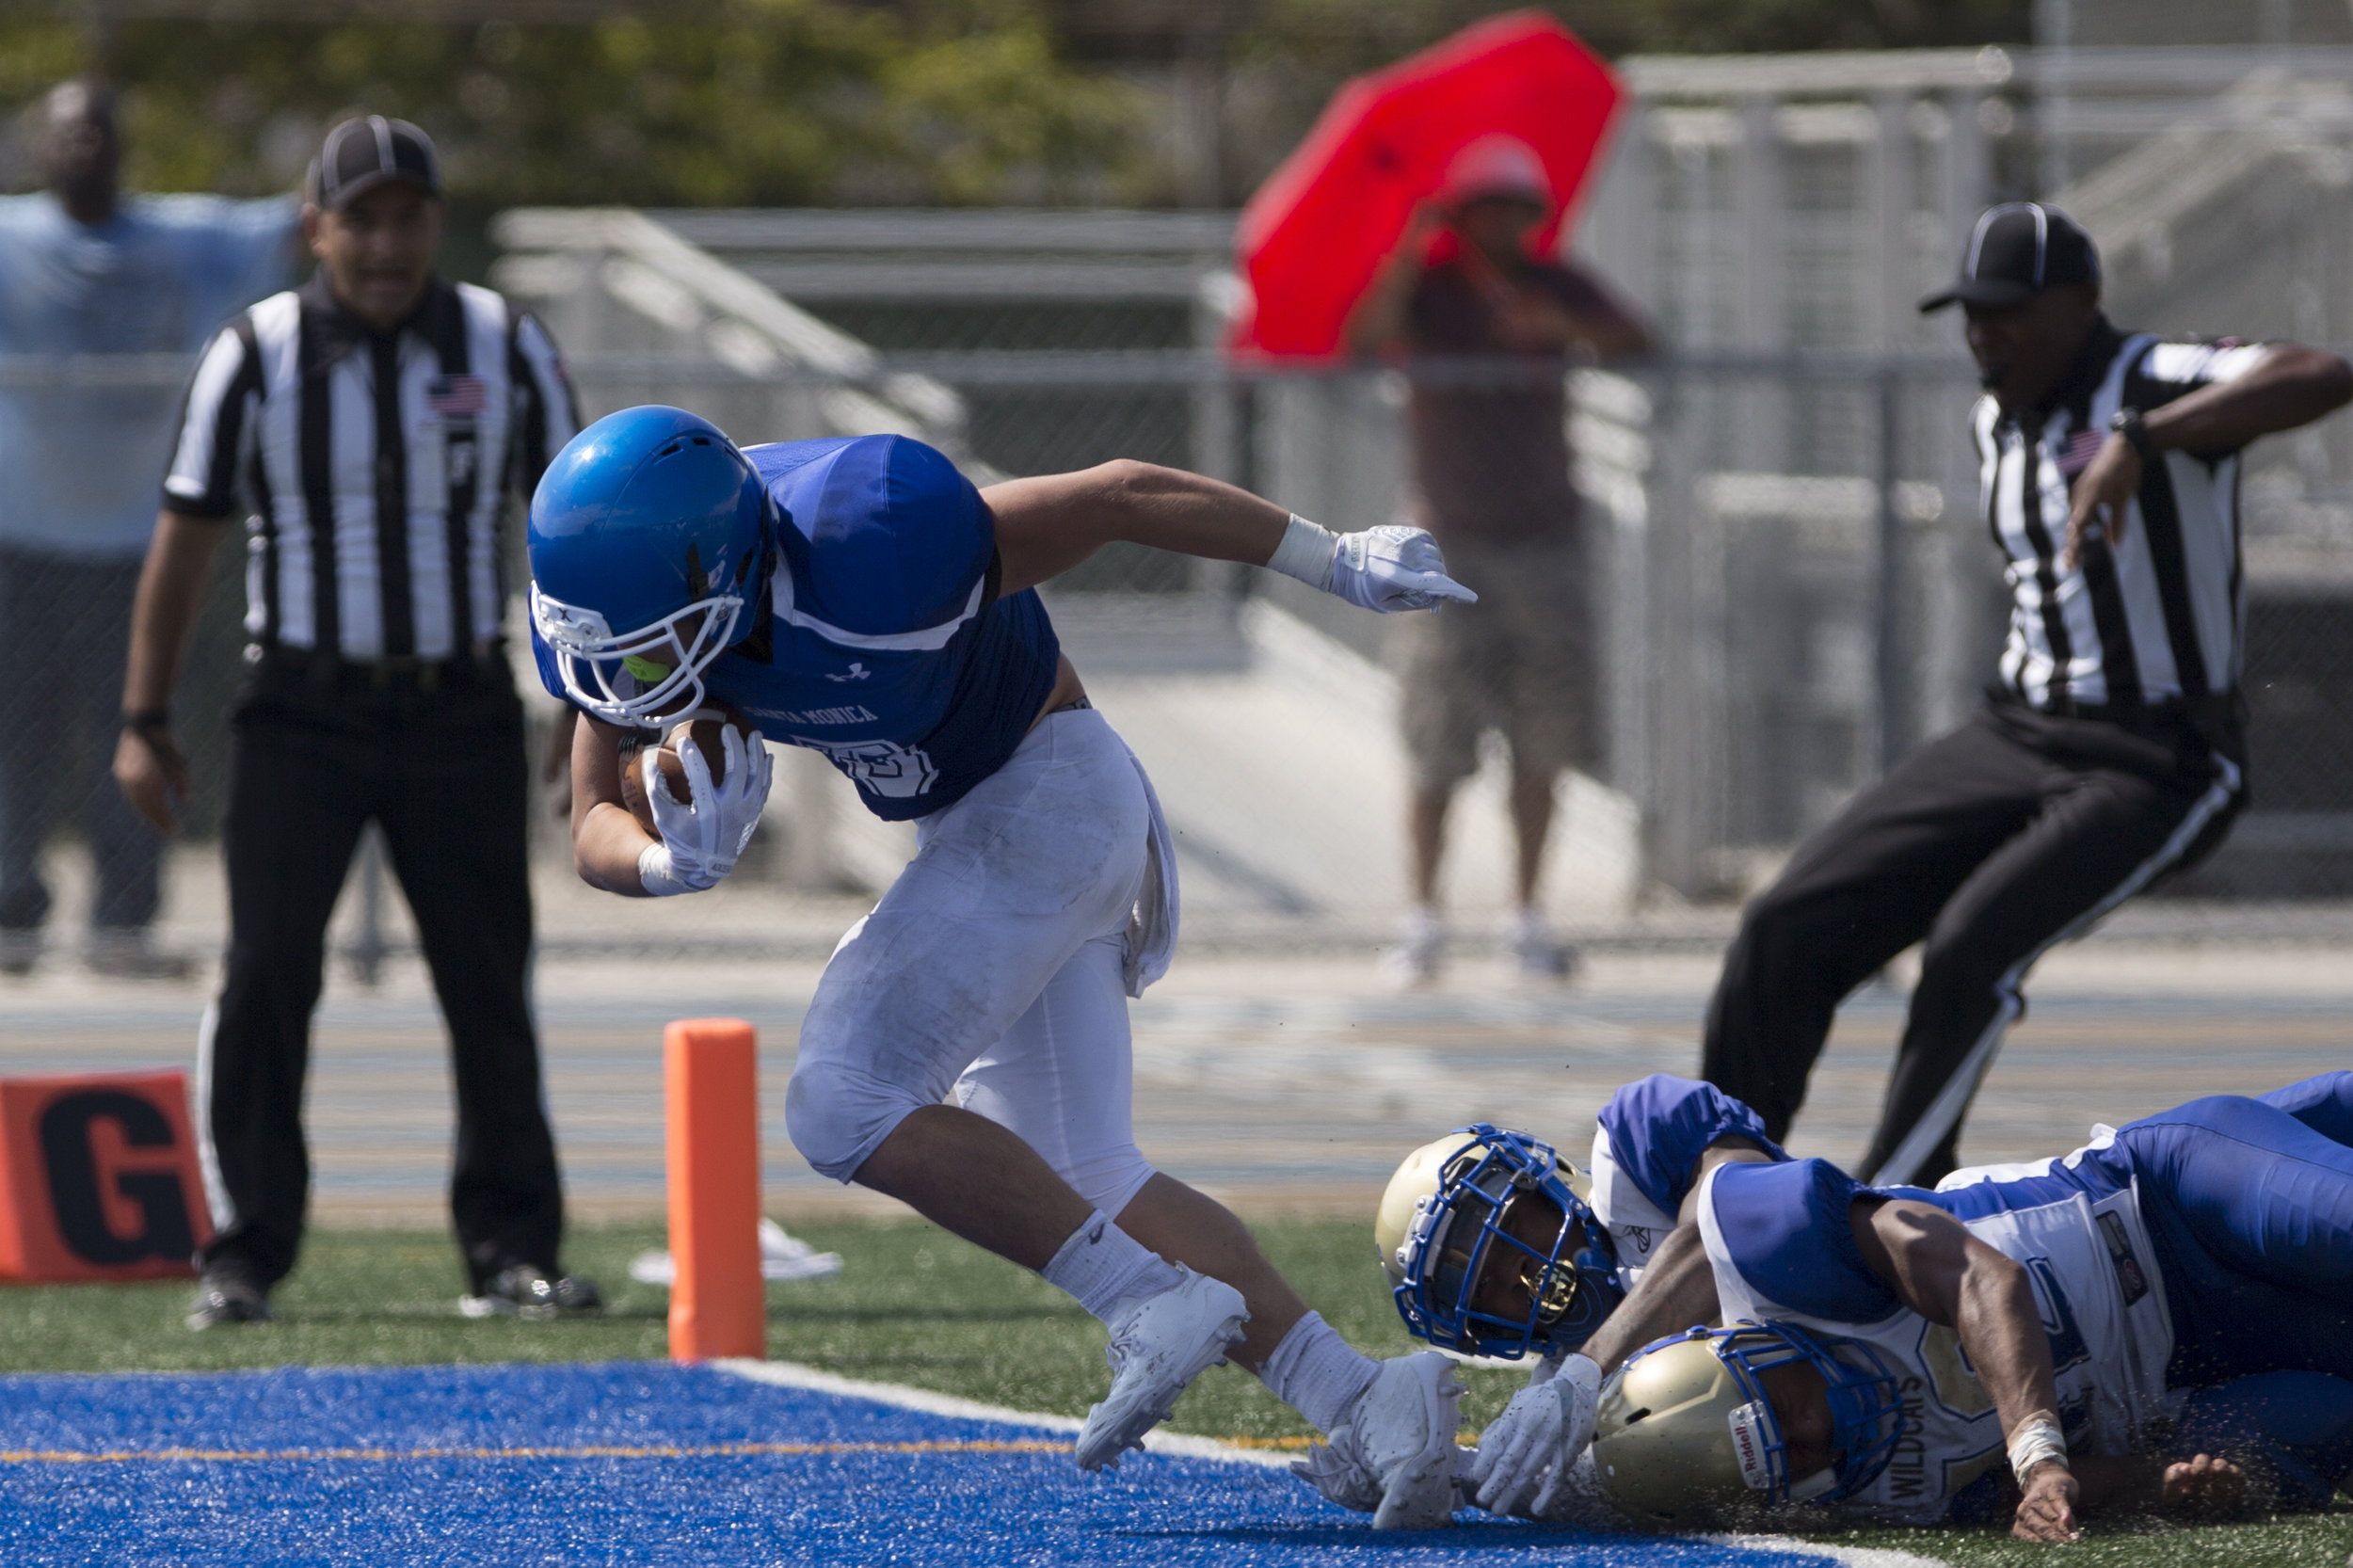  Santa Monica Corsair Christoph Hirota (5)(left) breaks a tackle from West Los Angeles Wildcats Aaron Brown (7)(center) and Alexander Johnson (42)(right) to score a touchdown during the third quarter on September 2, 2017 at West Los Angeles College i